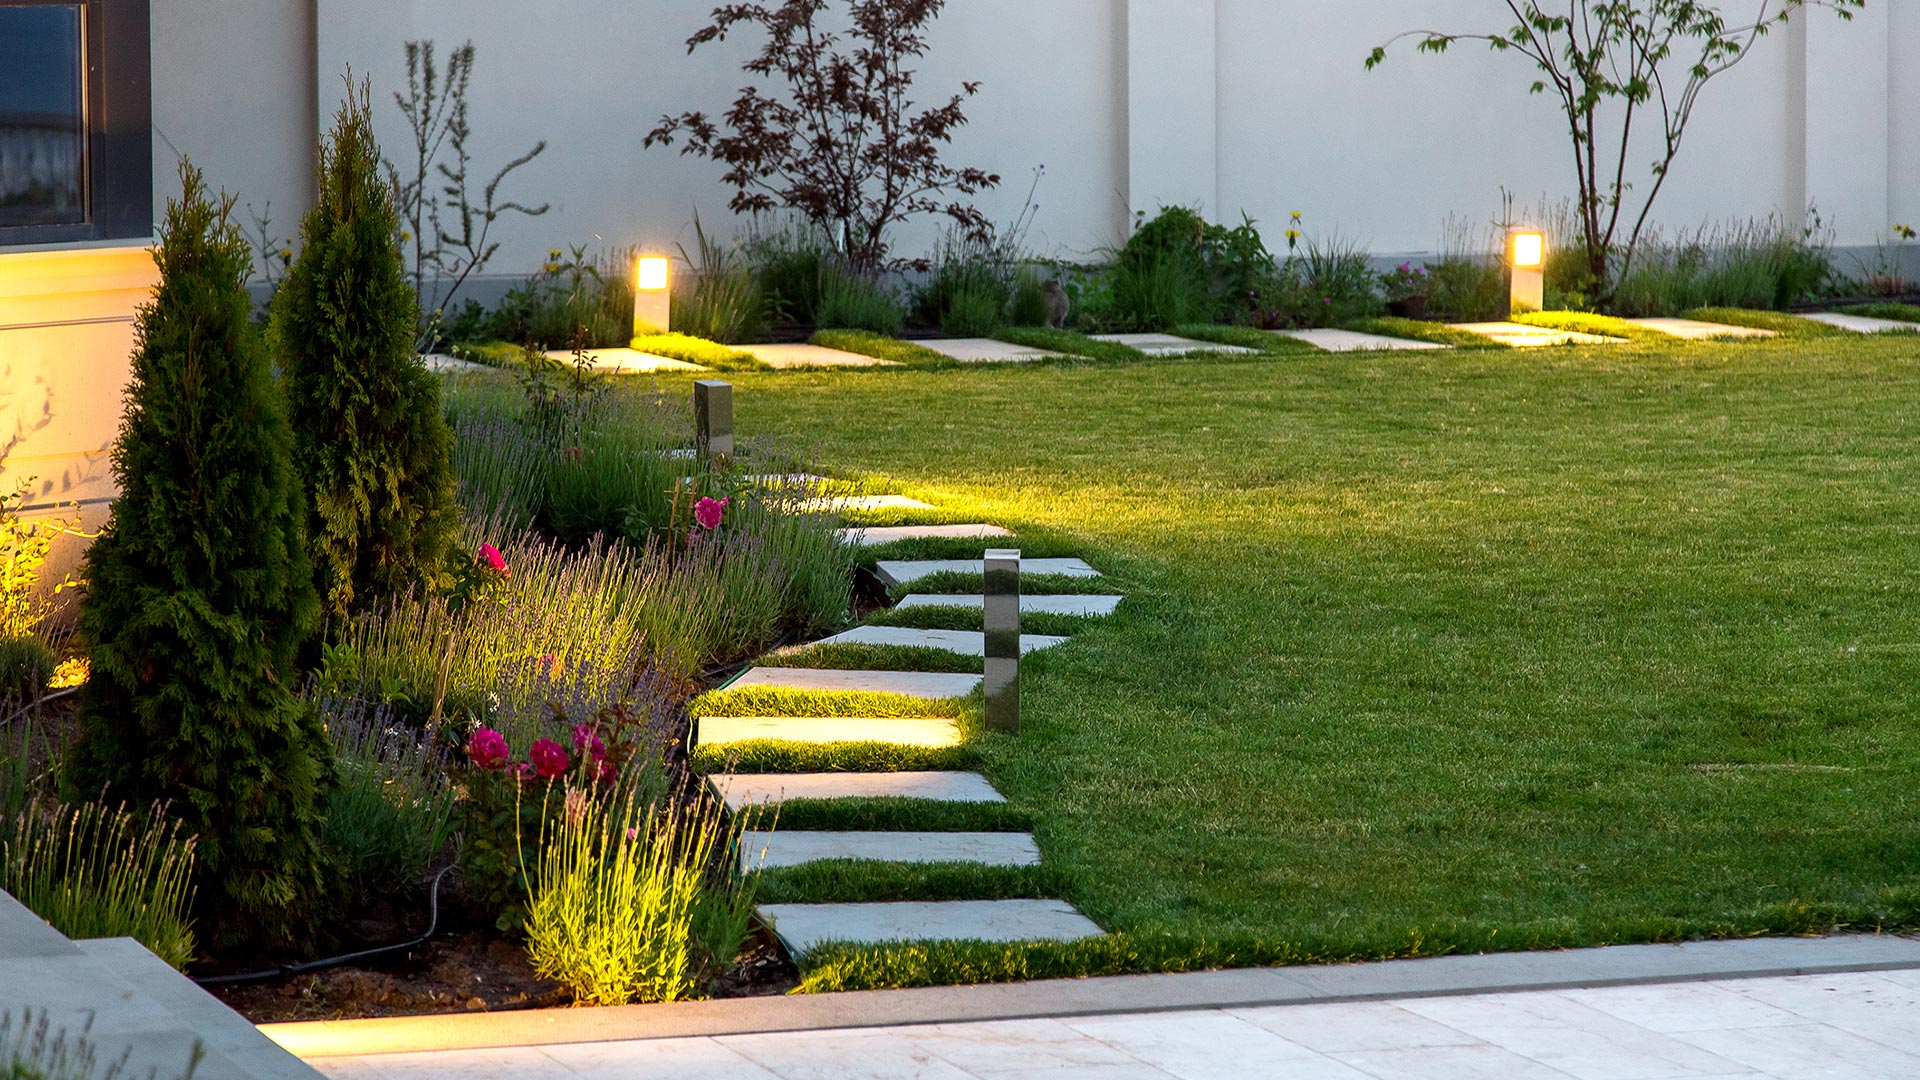 3 Reasons Why LED Bulbs Are the Best Choice for Your Landscape Lighting